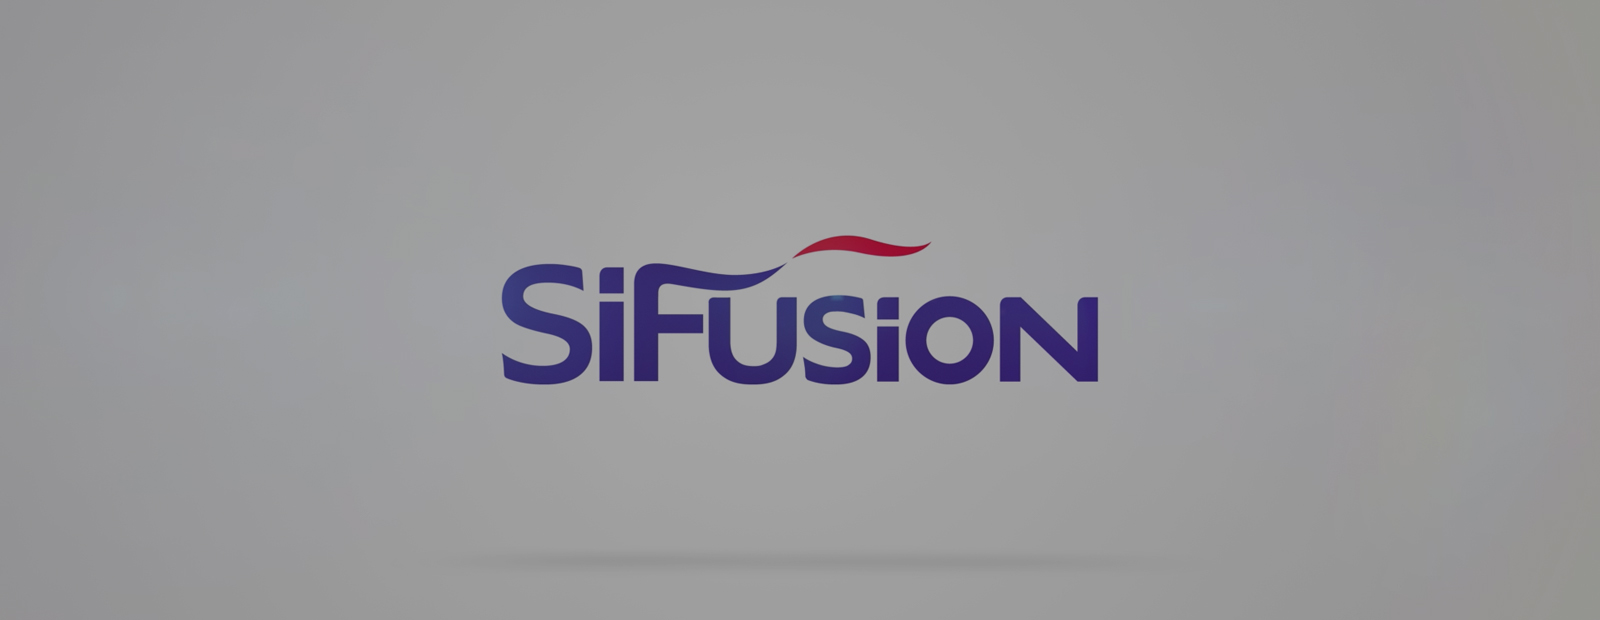 About SiFusion